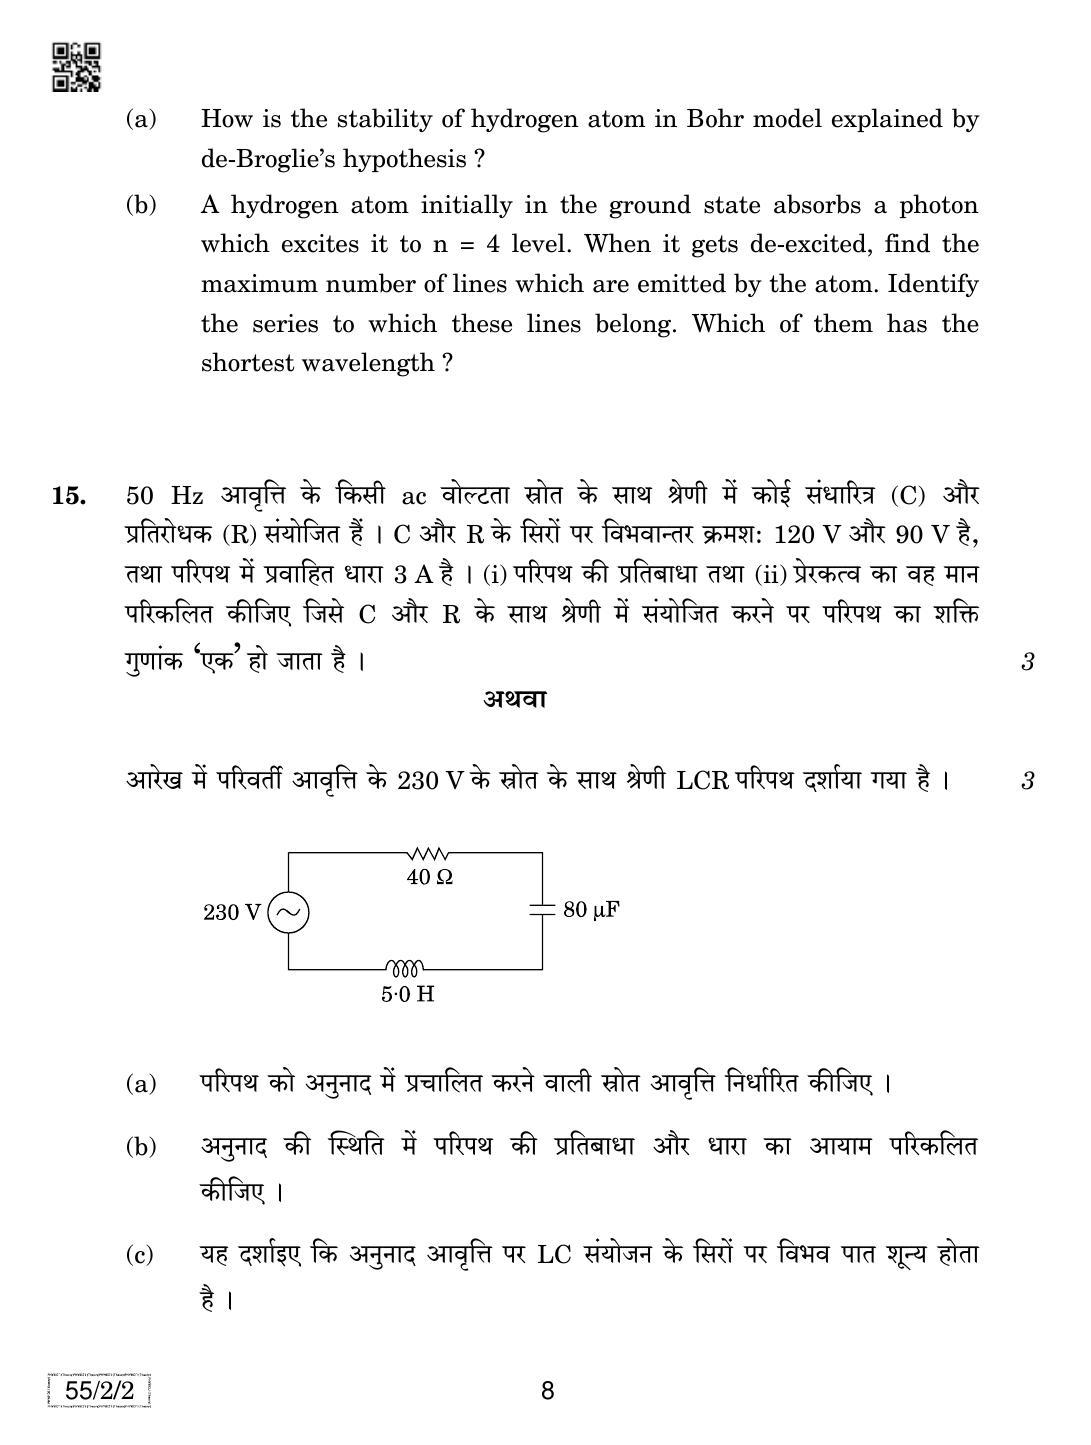 CBSE Class 12 55-2-2 Physics 2019 Question Paper - Page 8